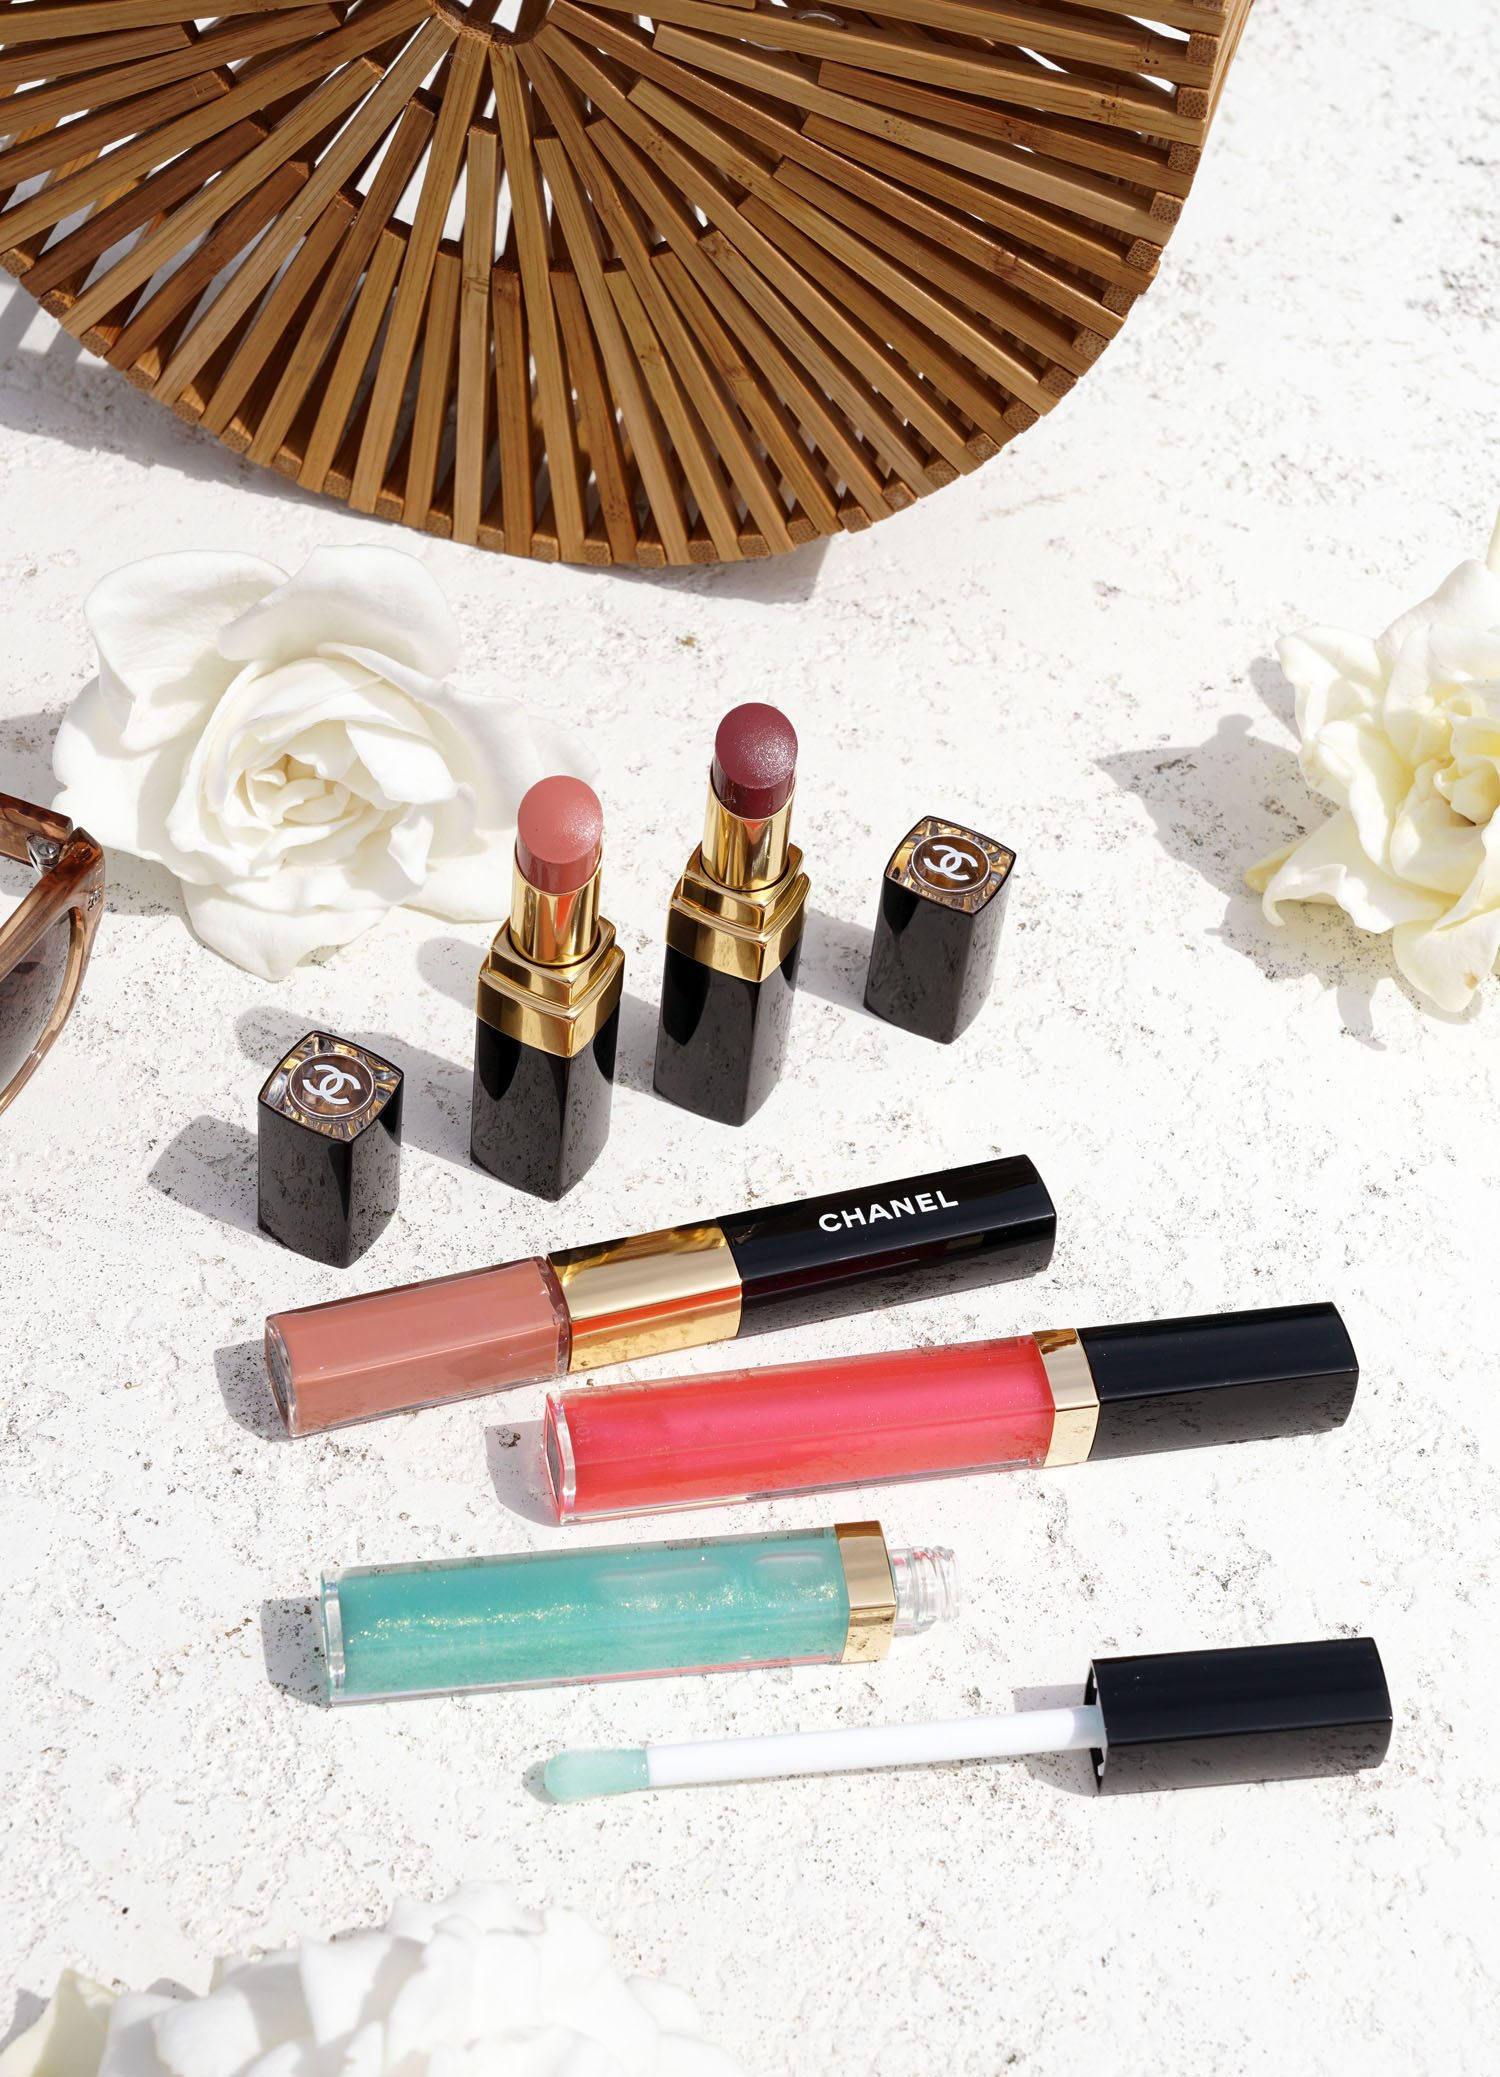 Chanel Cruise 2019 Vision d'Asie Makeup Collection